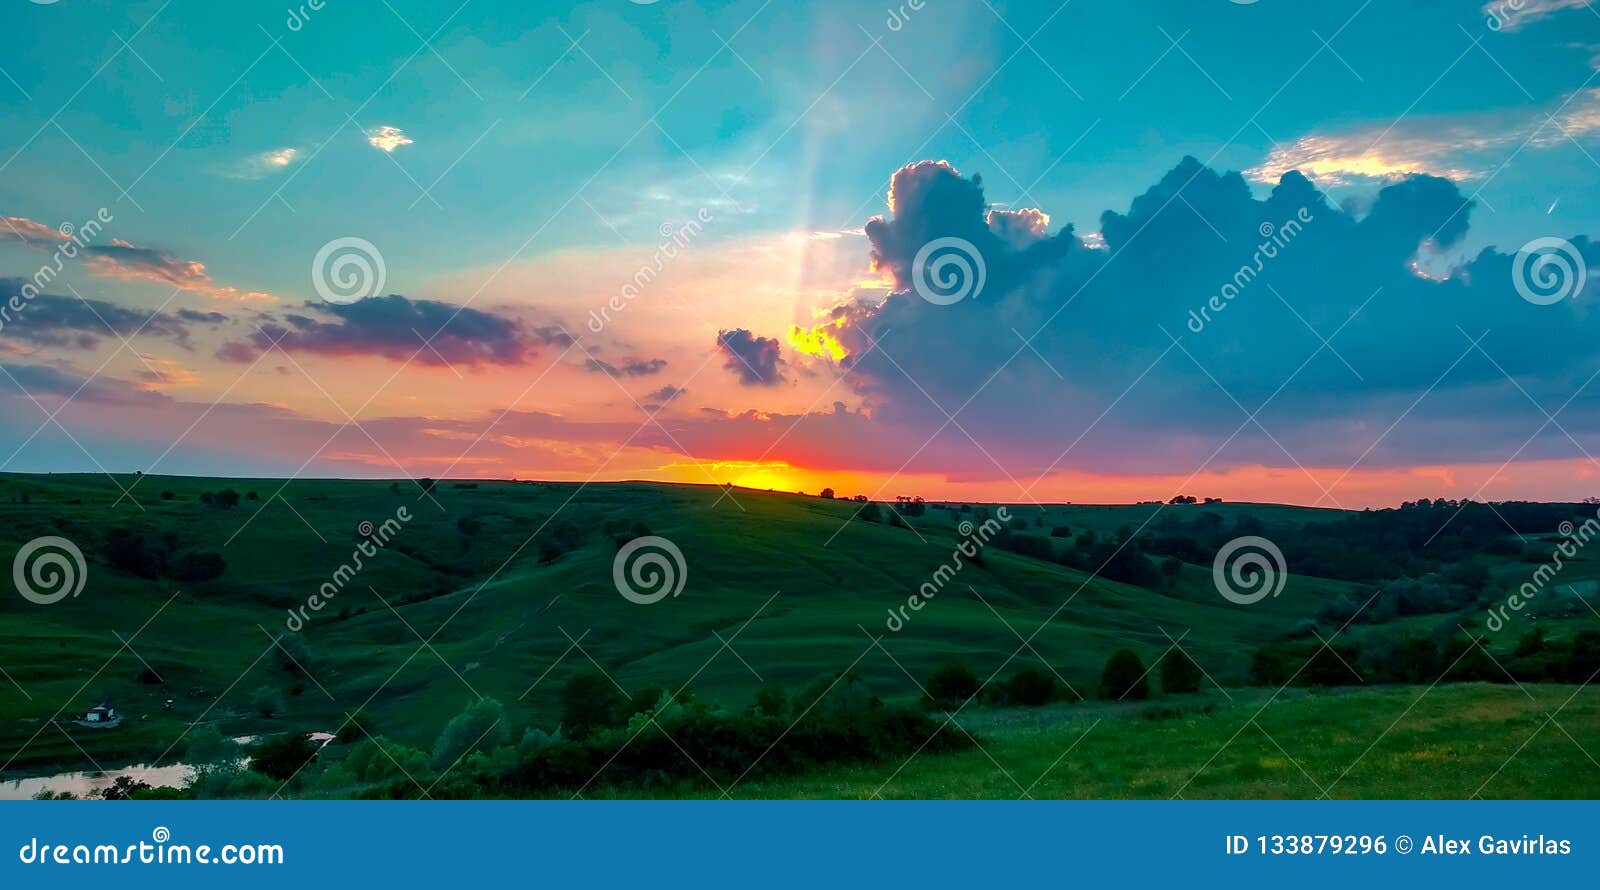 colorful orange sunset on green hills with a calming blue sky durig a warm summer